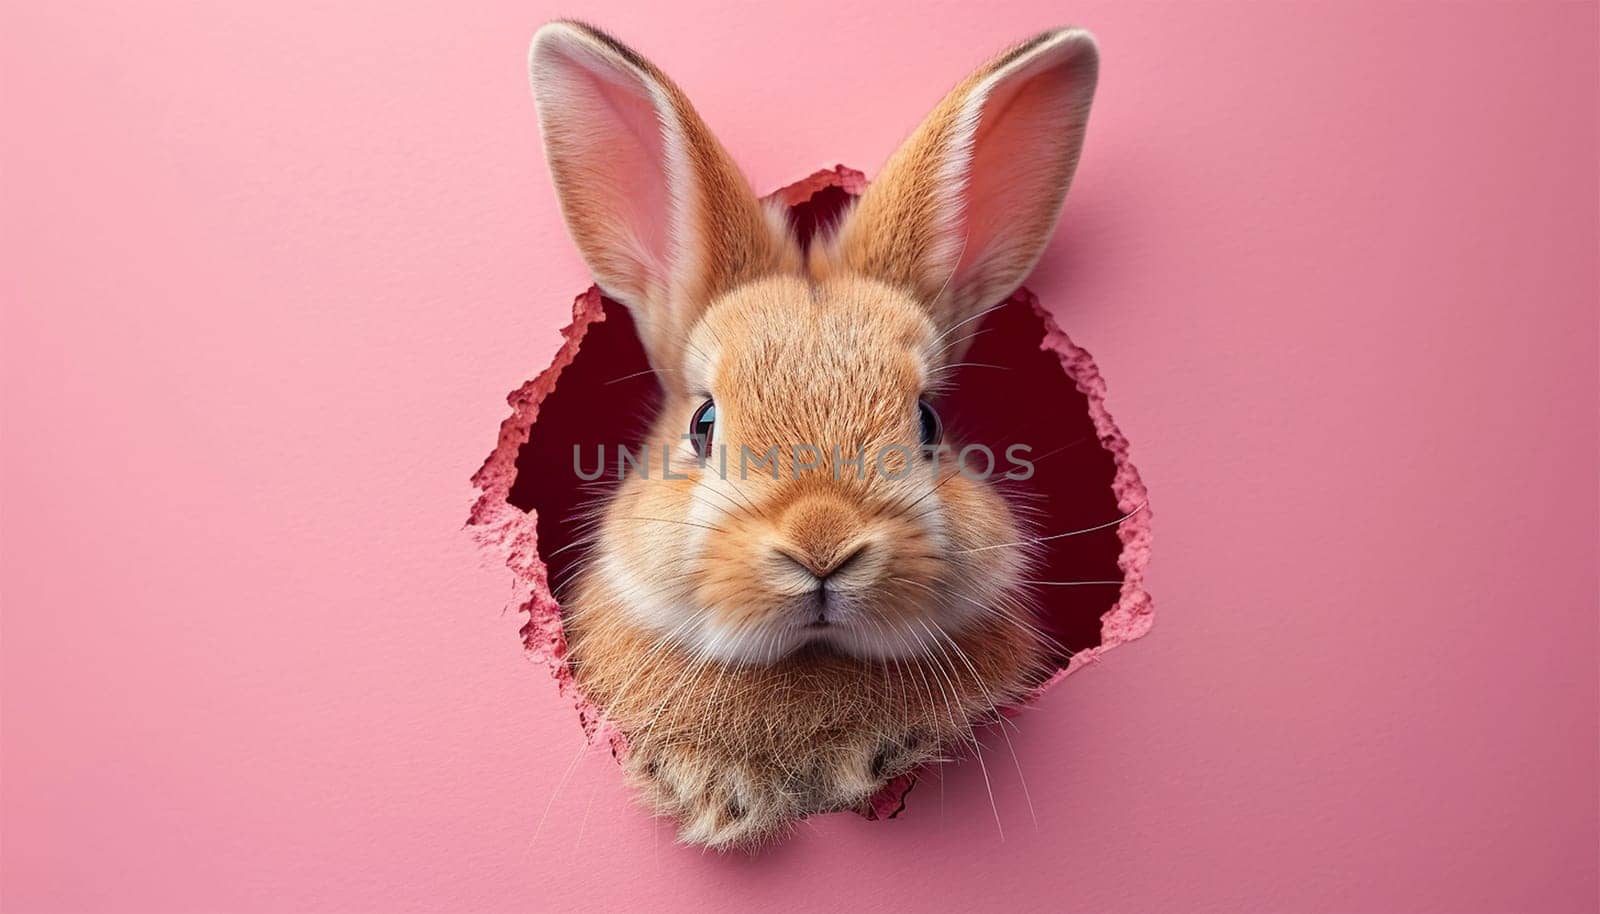 Cartoon cute bunny looking out of a cut hole bright pink background. illustration. Spring holiday and Easter background. Copy space Happy Easter funny